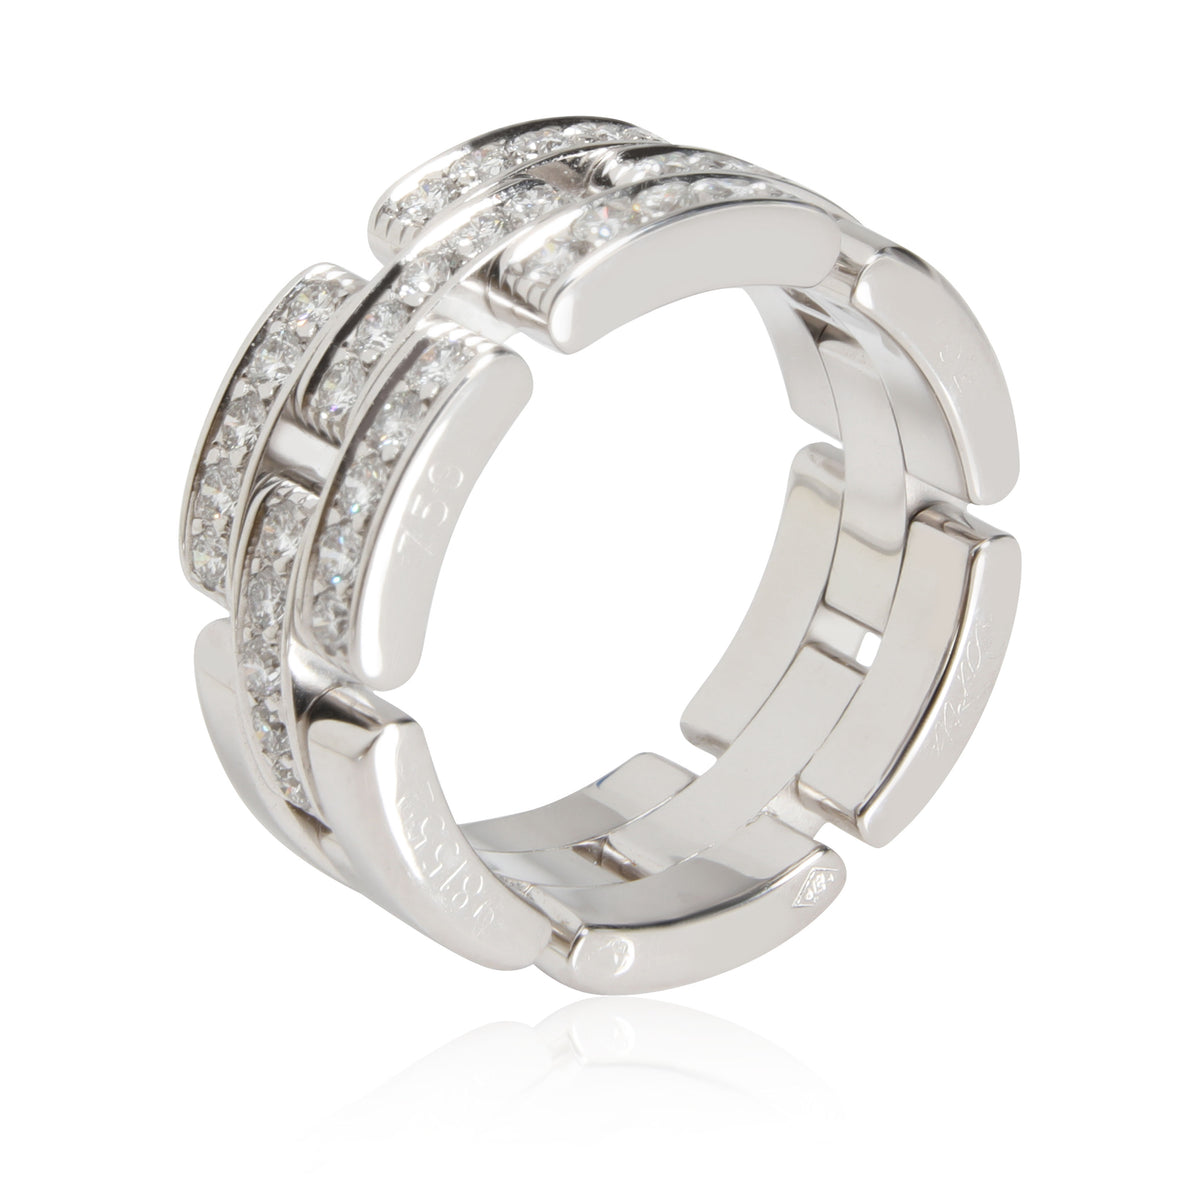 Cartier Panthere Diamond Band in 18k White Gold 0.53 CTW